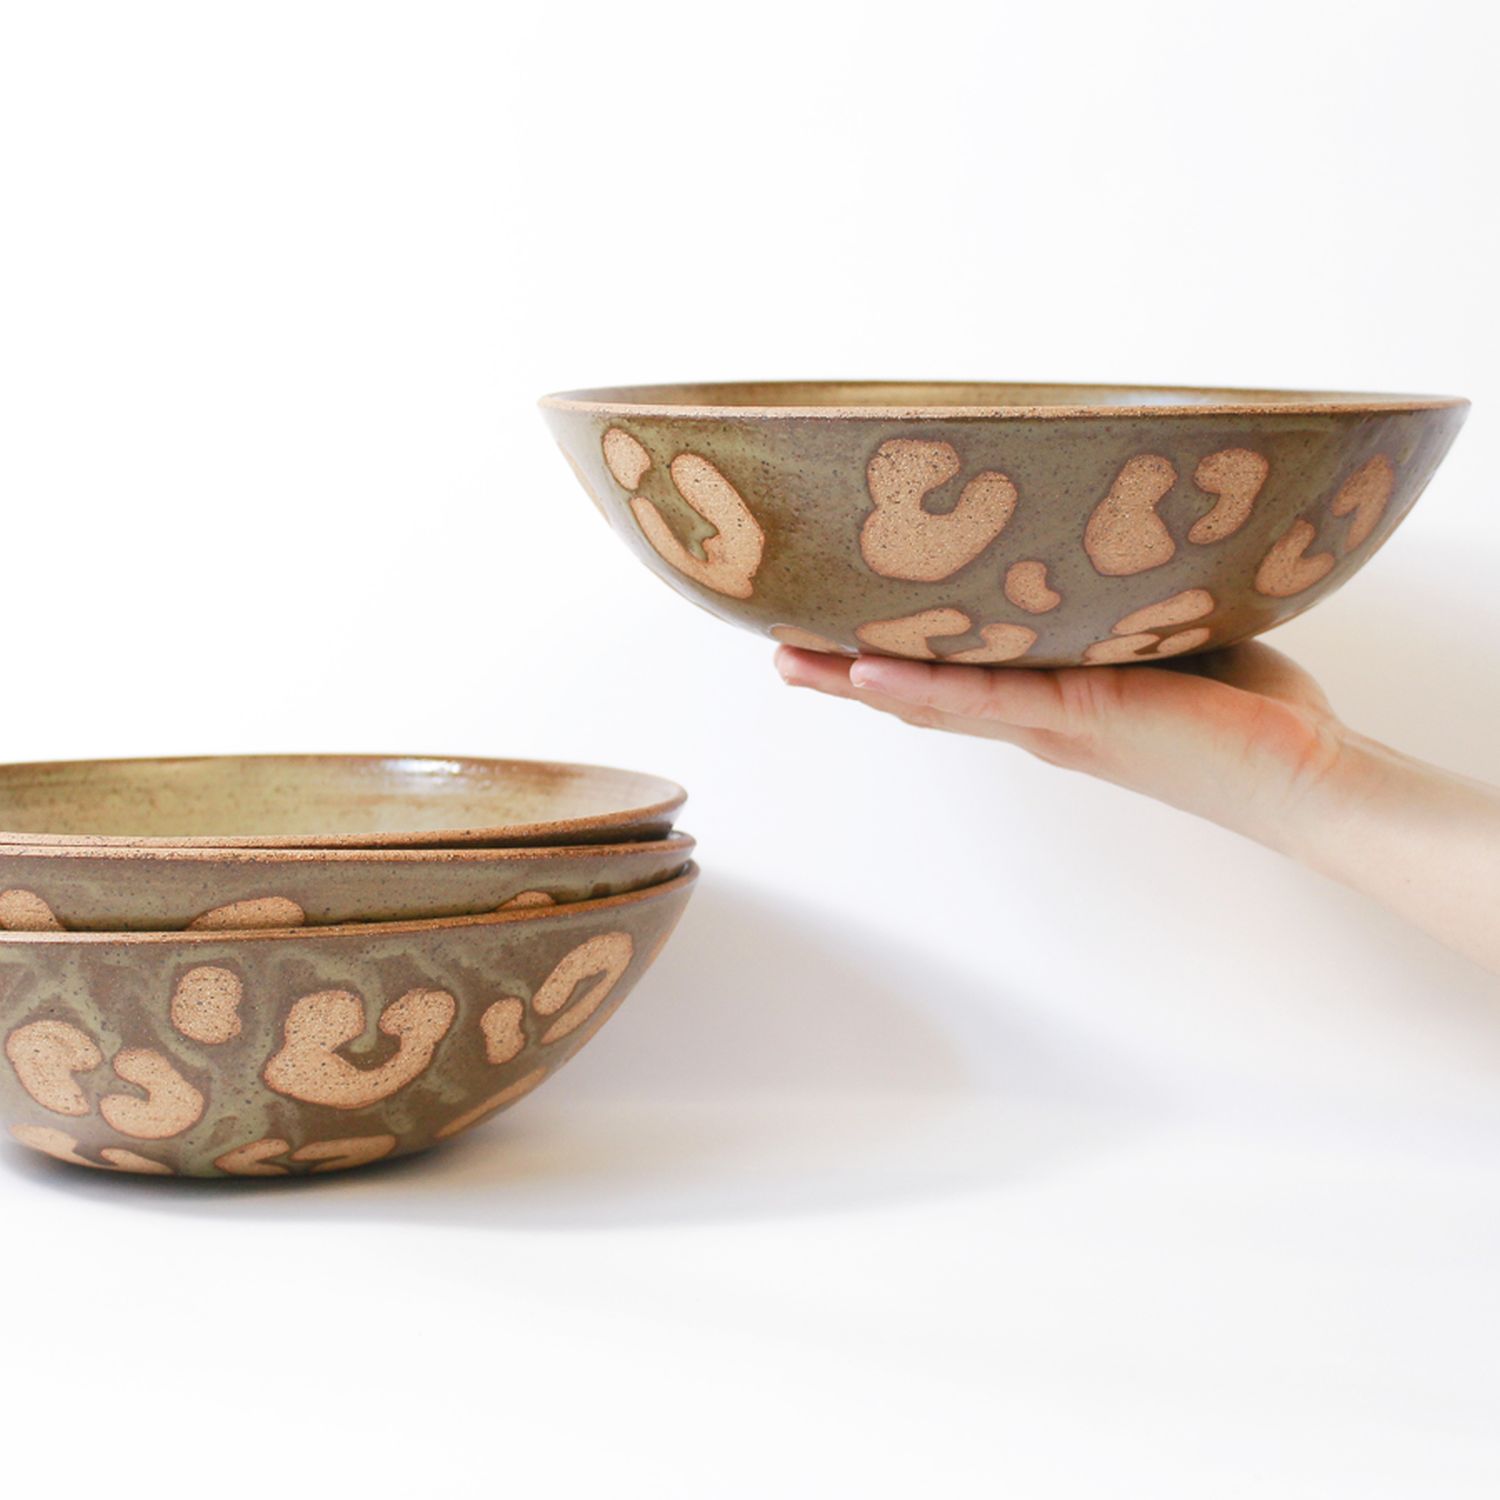 Mima Ceramics: Wide Shallow Bowl Olive Product Image 1 of 1